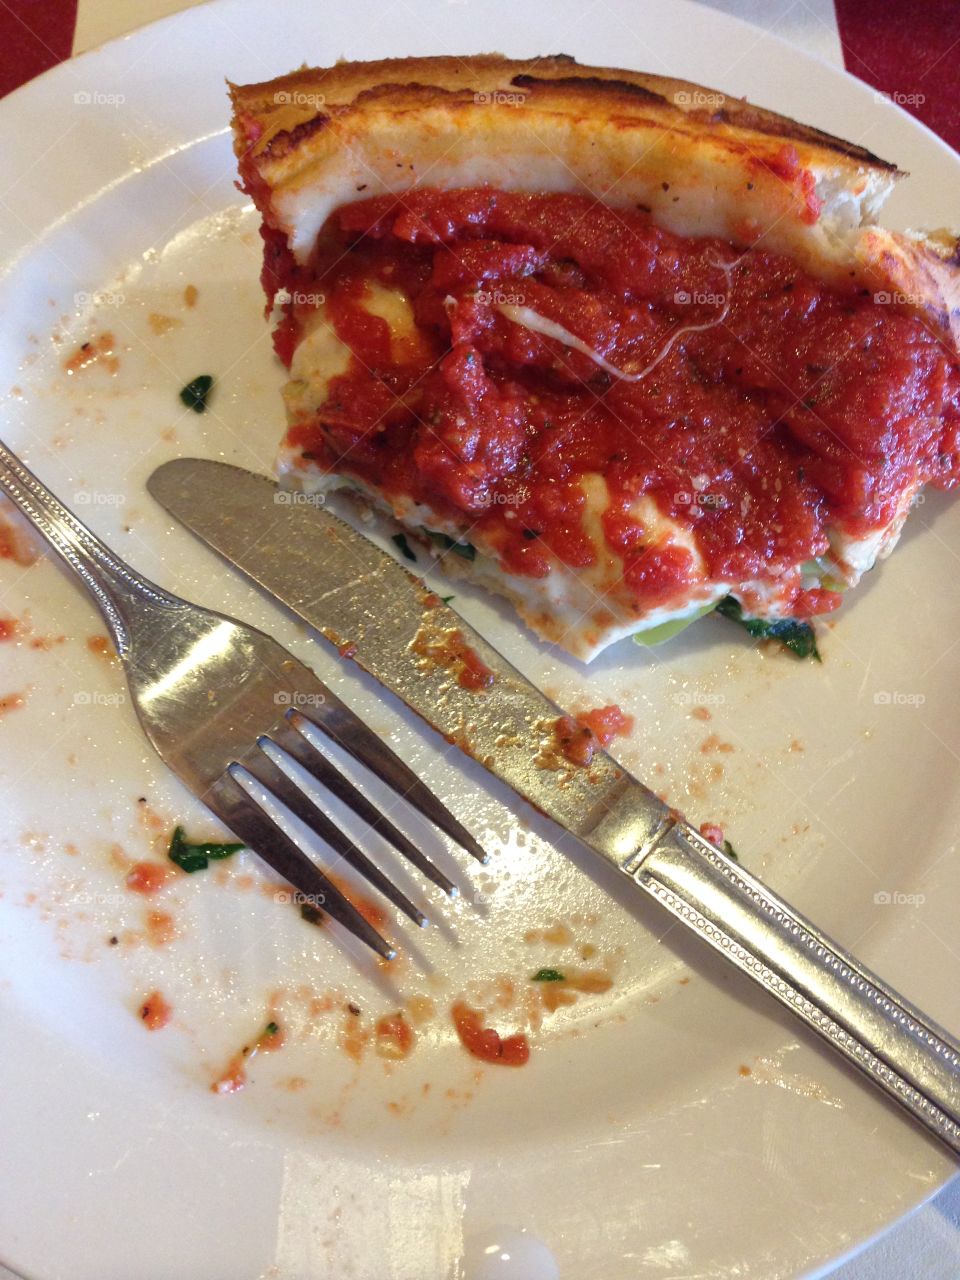 Deep dish from the source.